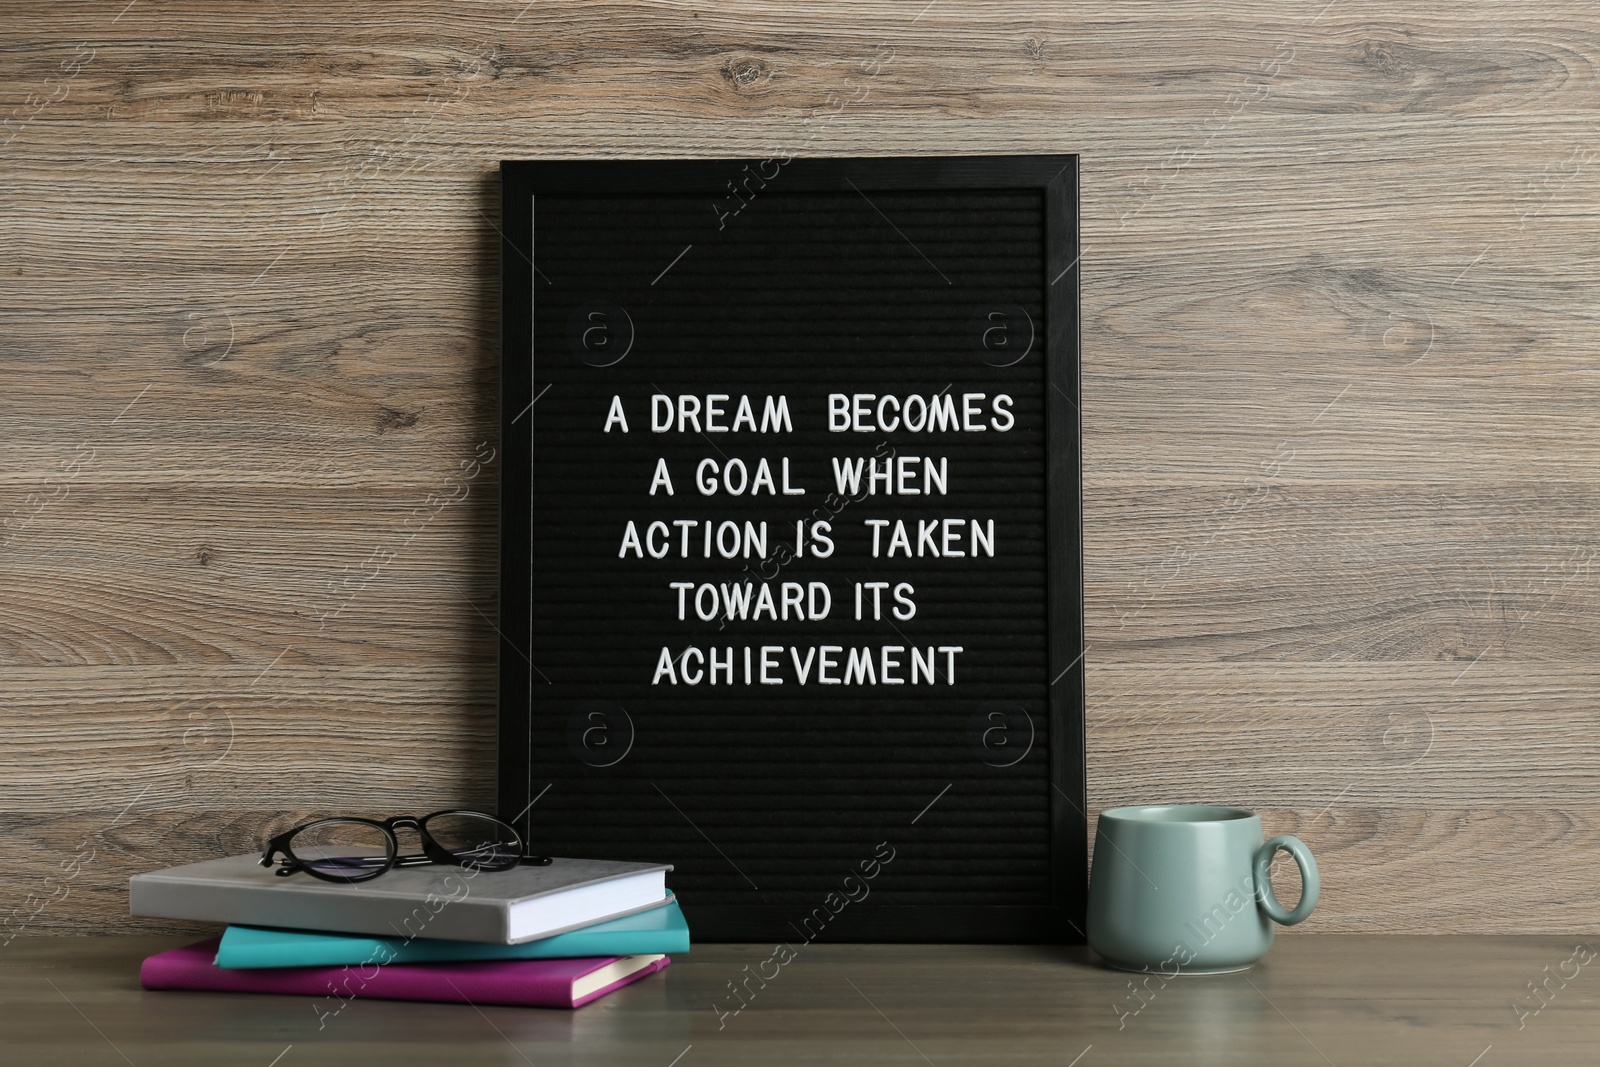 Photo of Black letter board with motivational quote a Dream Becomes a Goal When Action is Taken Toward its Achievement, notebooks and cup on wooden table